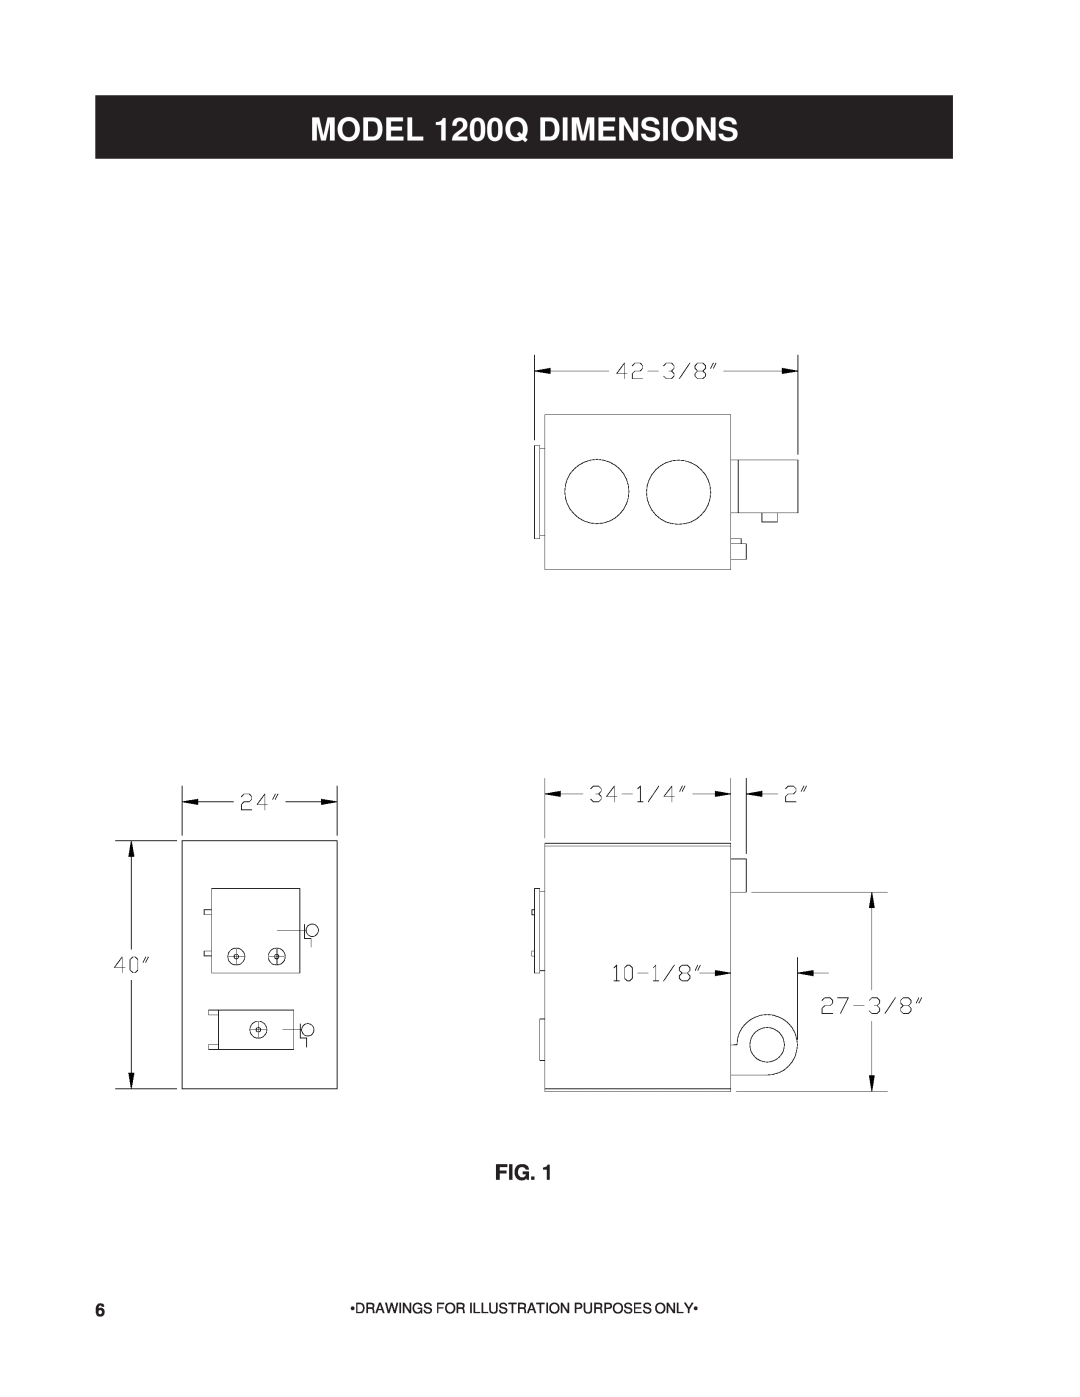 United States Stove owner manual MODEL 1200Q DIMENSIONS, Fig, •Drawings For Illustration Purposes Only• 